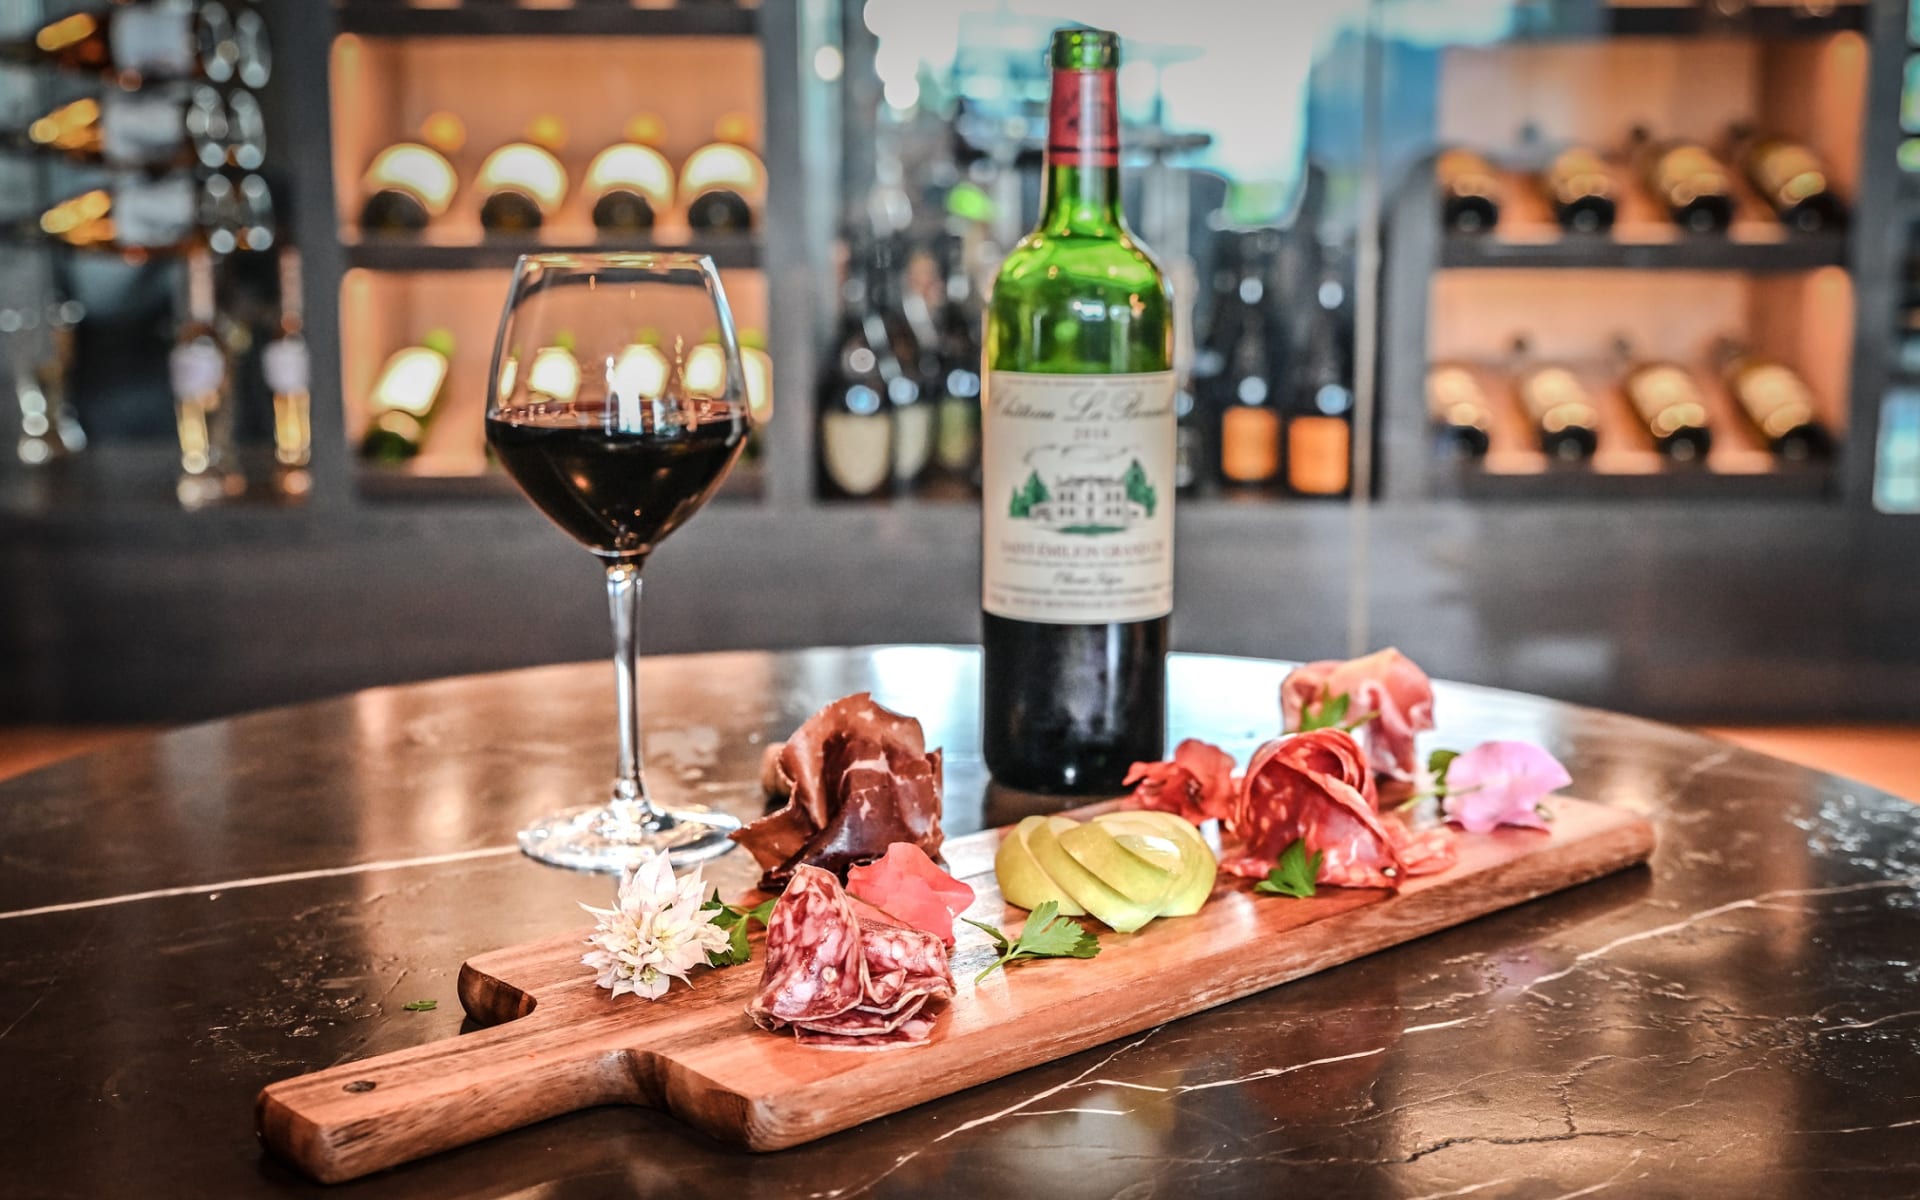 A charcuterie board has ham and cheese and is paired with a glass or red wine.